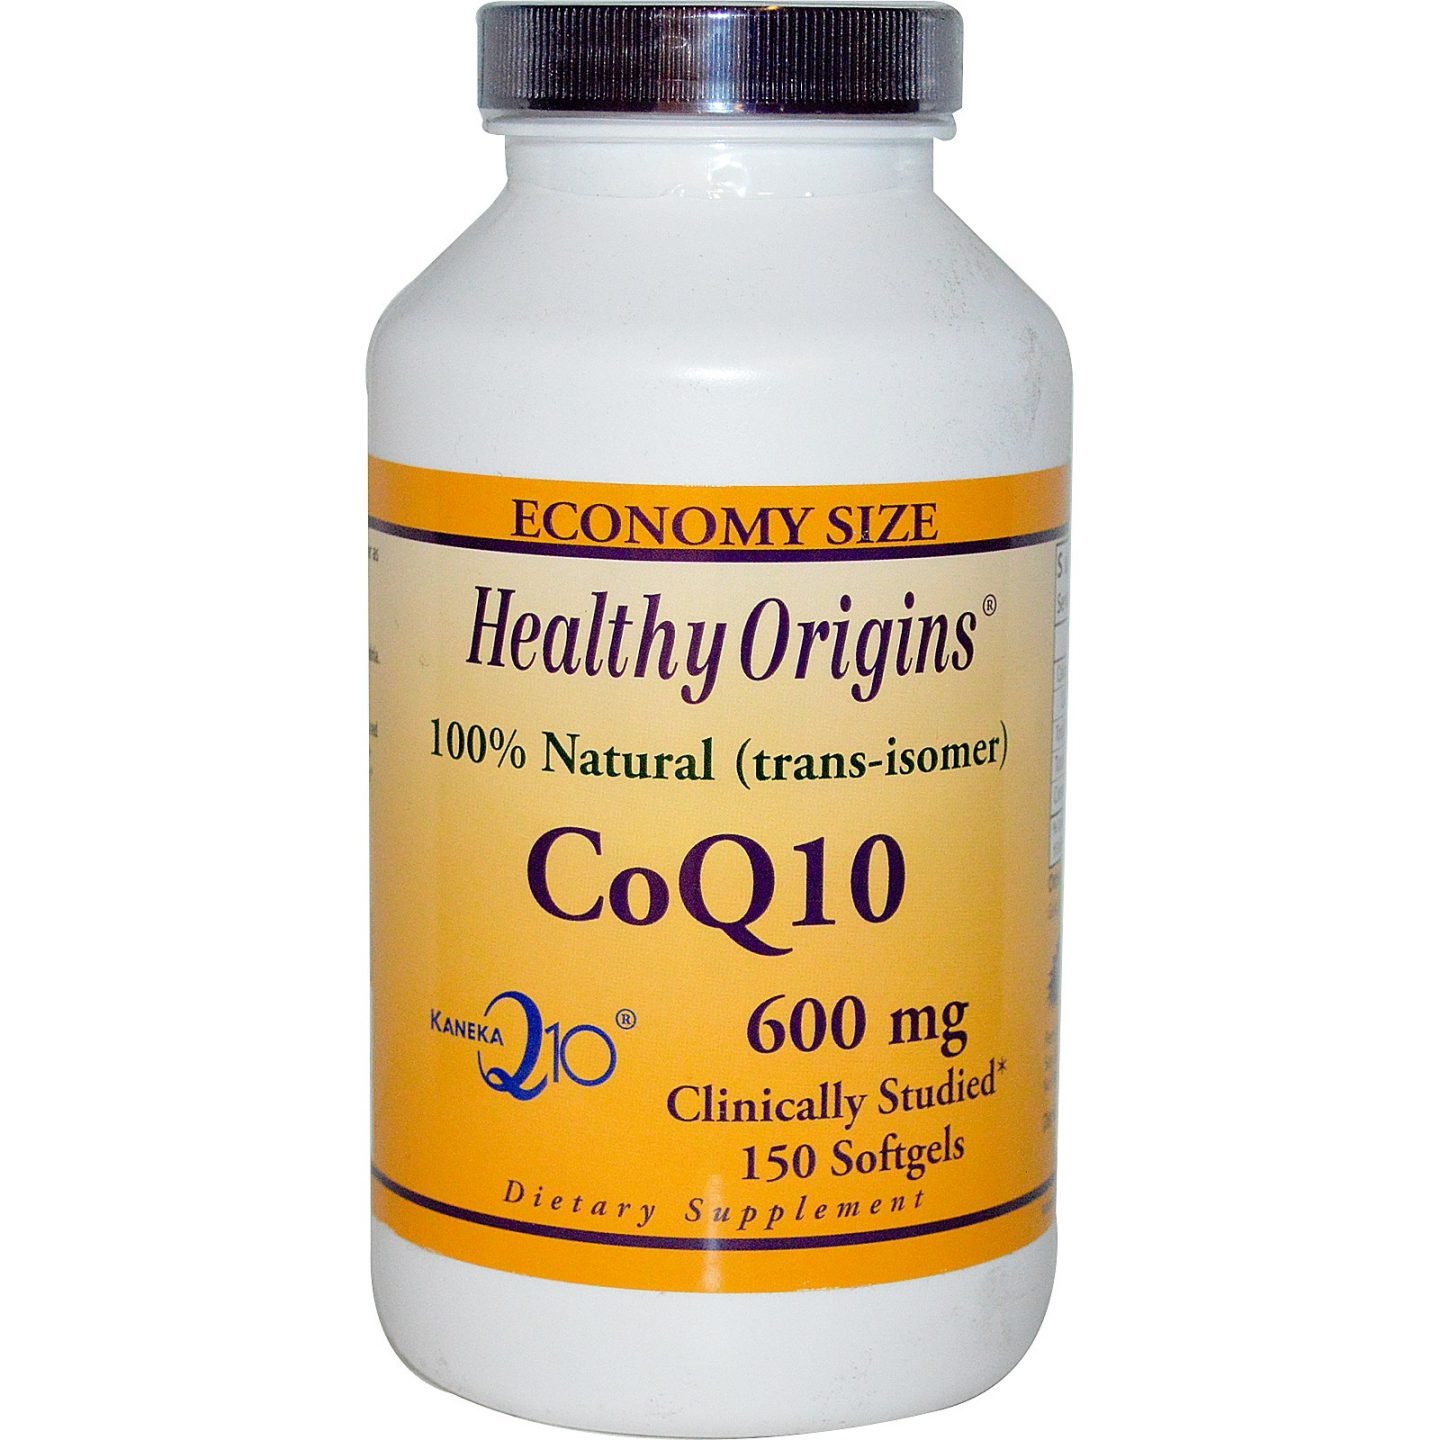 COQ10: the supplement to take 2